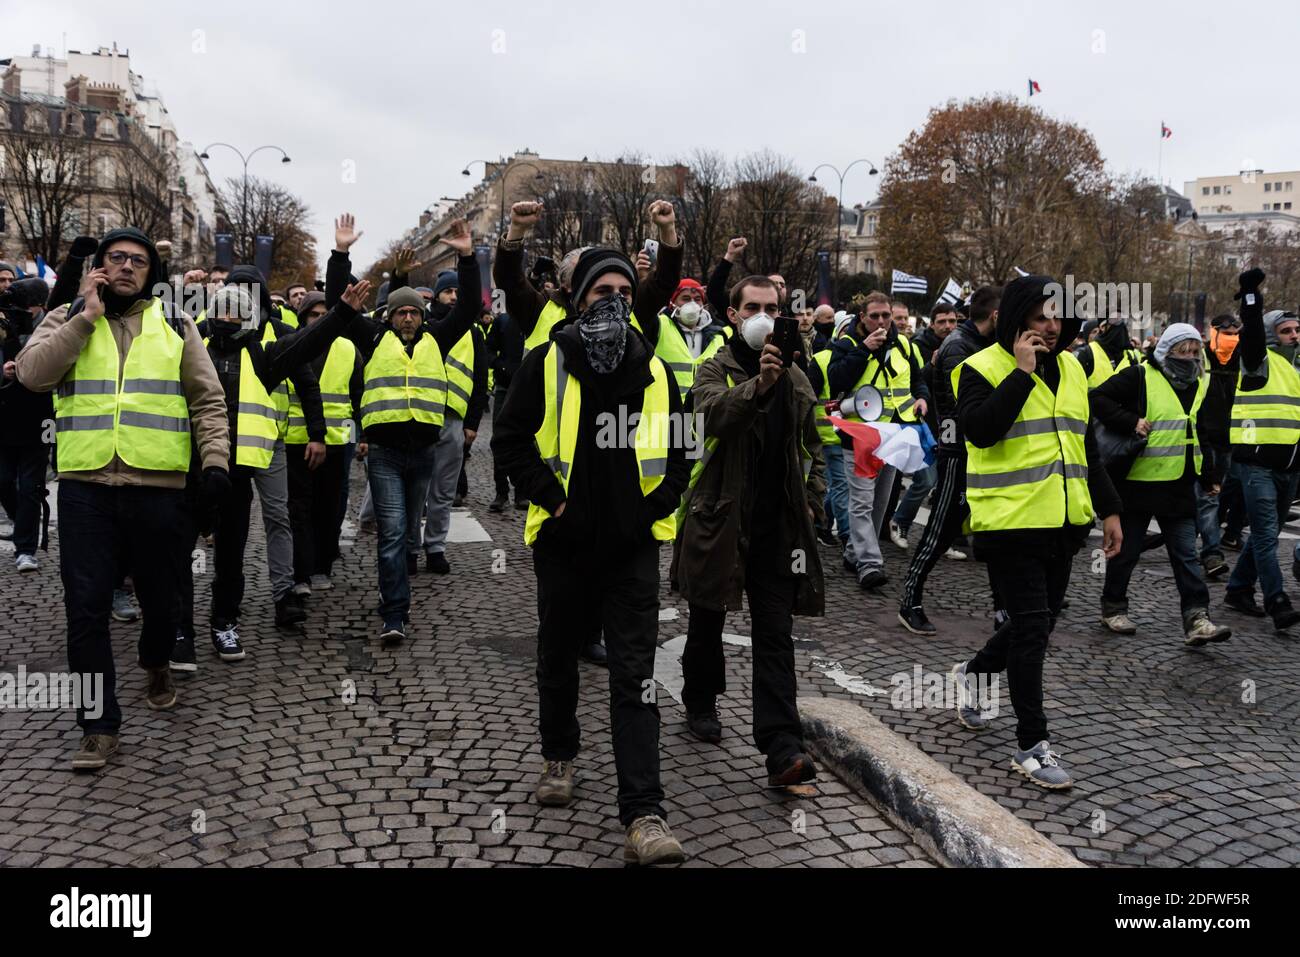 Yellow vests (Gilets Jaunes) protestors clash with riot police during a  protest against rising oil prices on the Champs Elysees in Paris, France on  November 24, 2018. Security forces in Paris fired